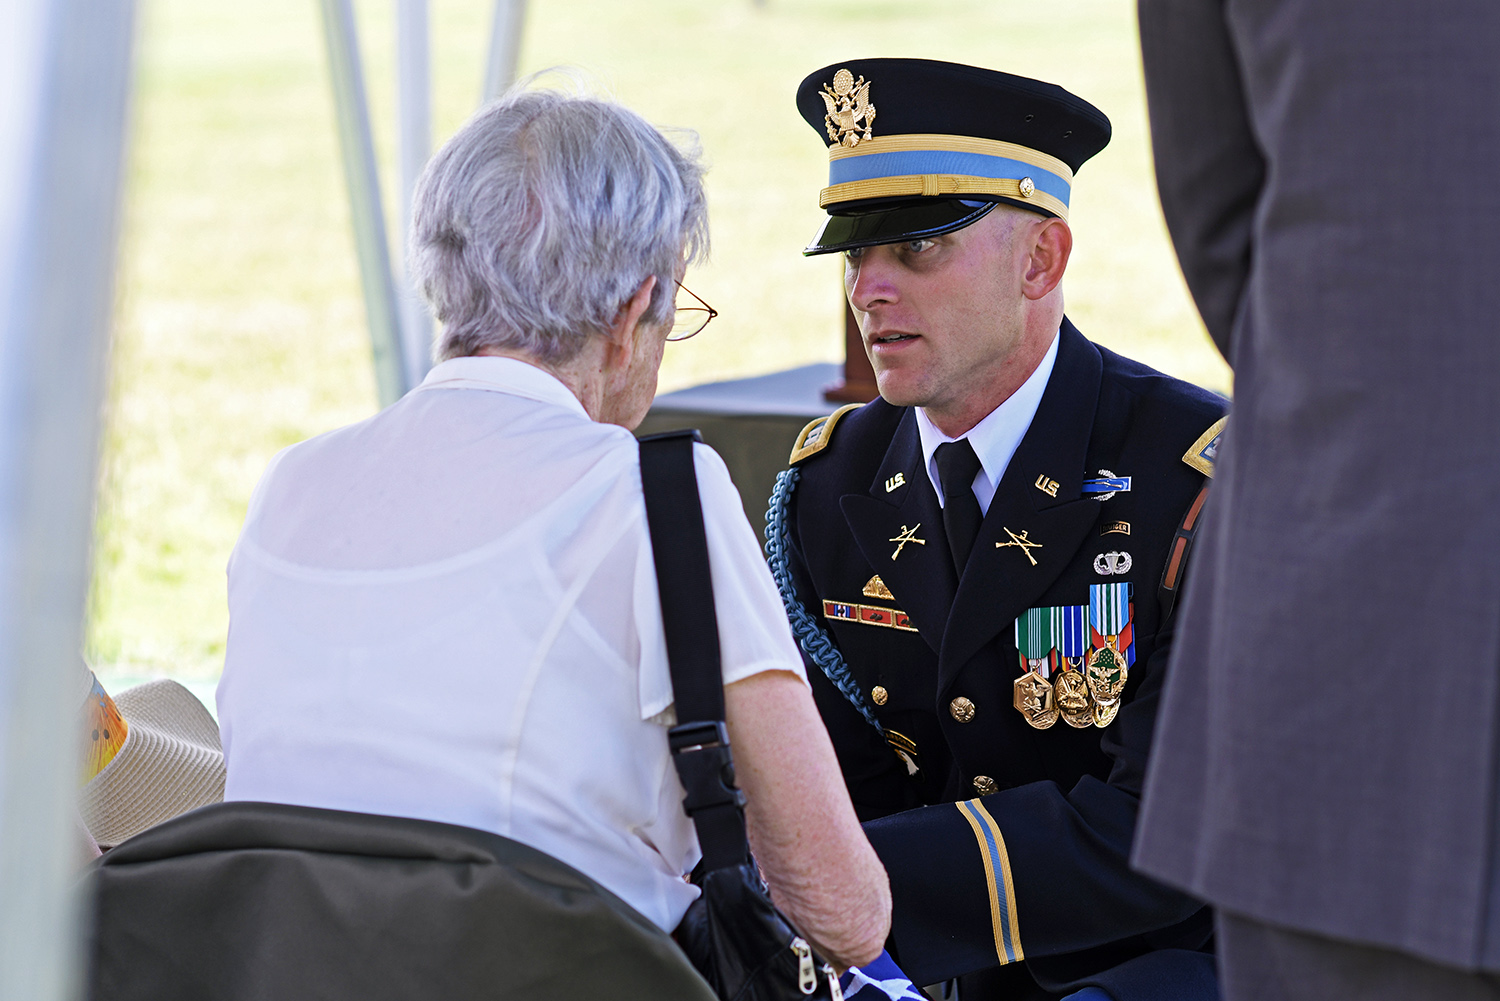 US_Army_Funeral_Arlington_National_Cemetery_Soldier_Console_Widow_Flag_Ceremony.jpg